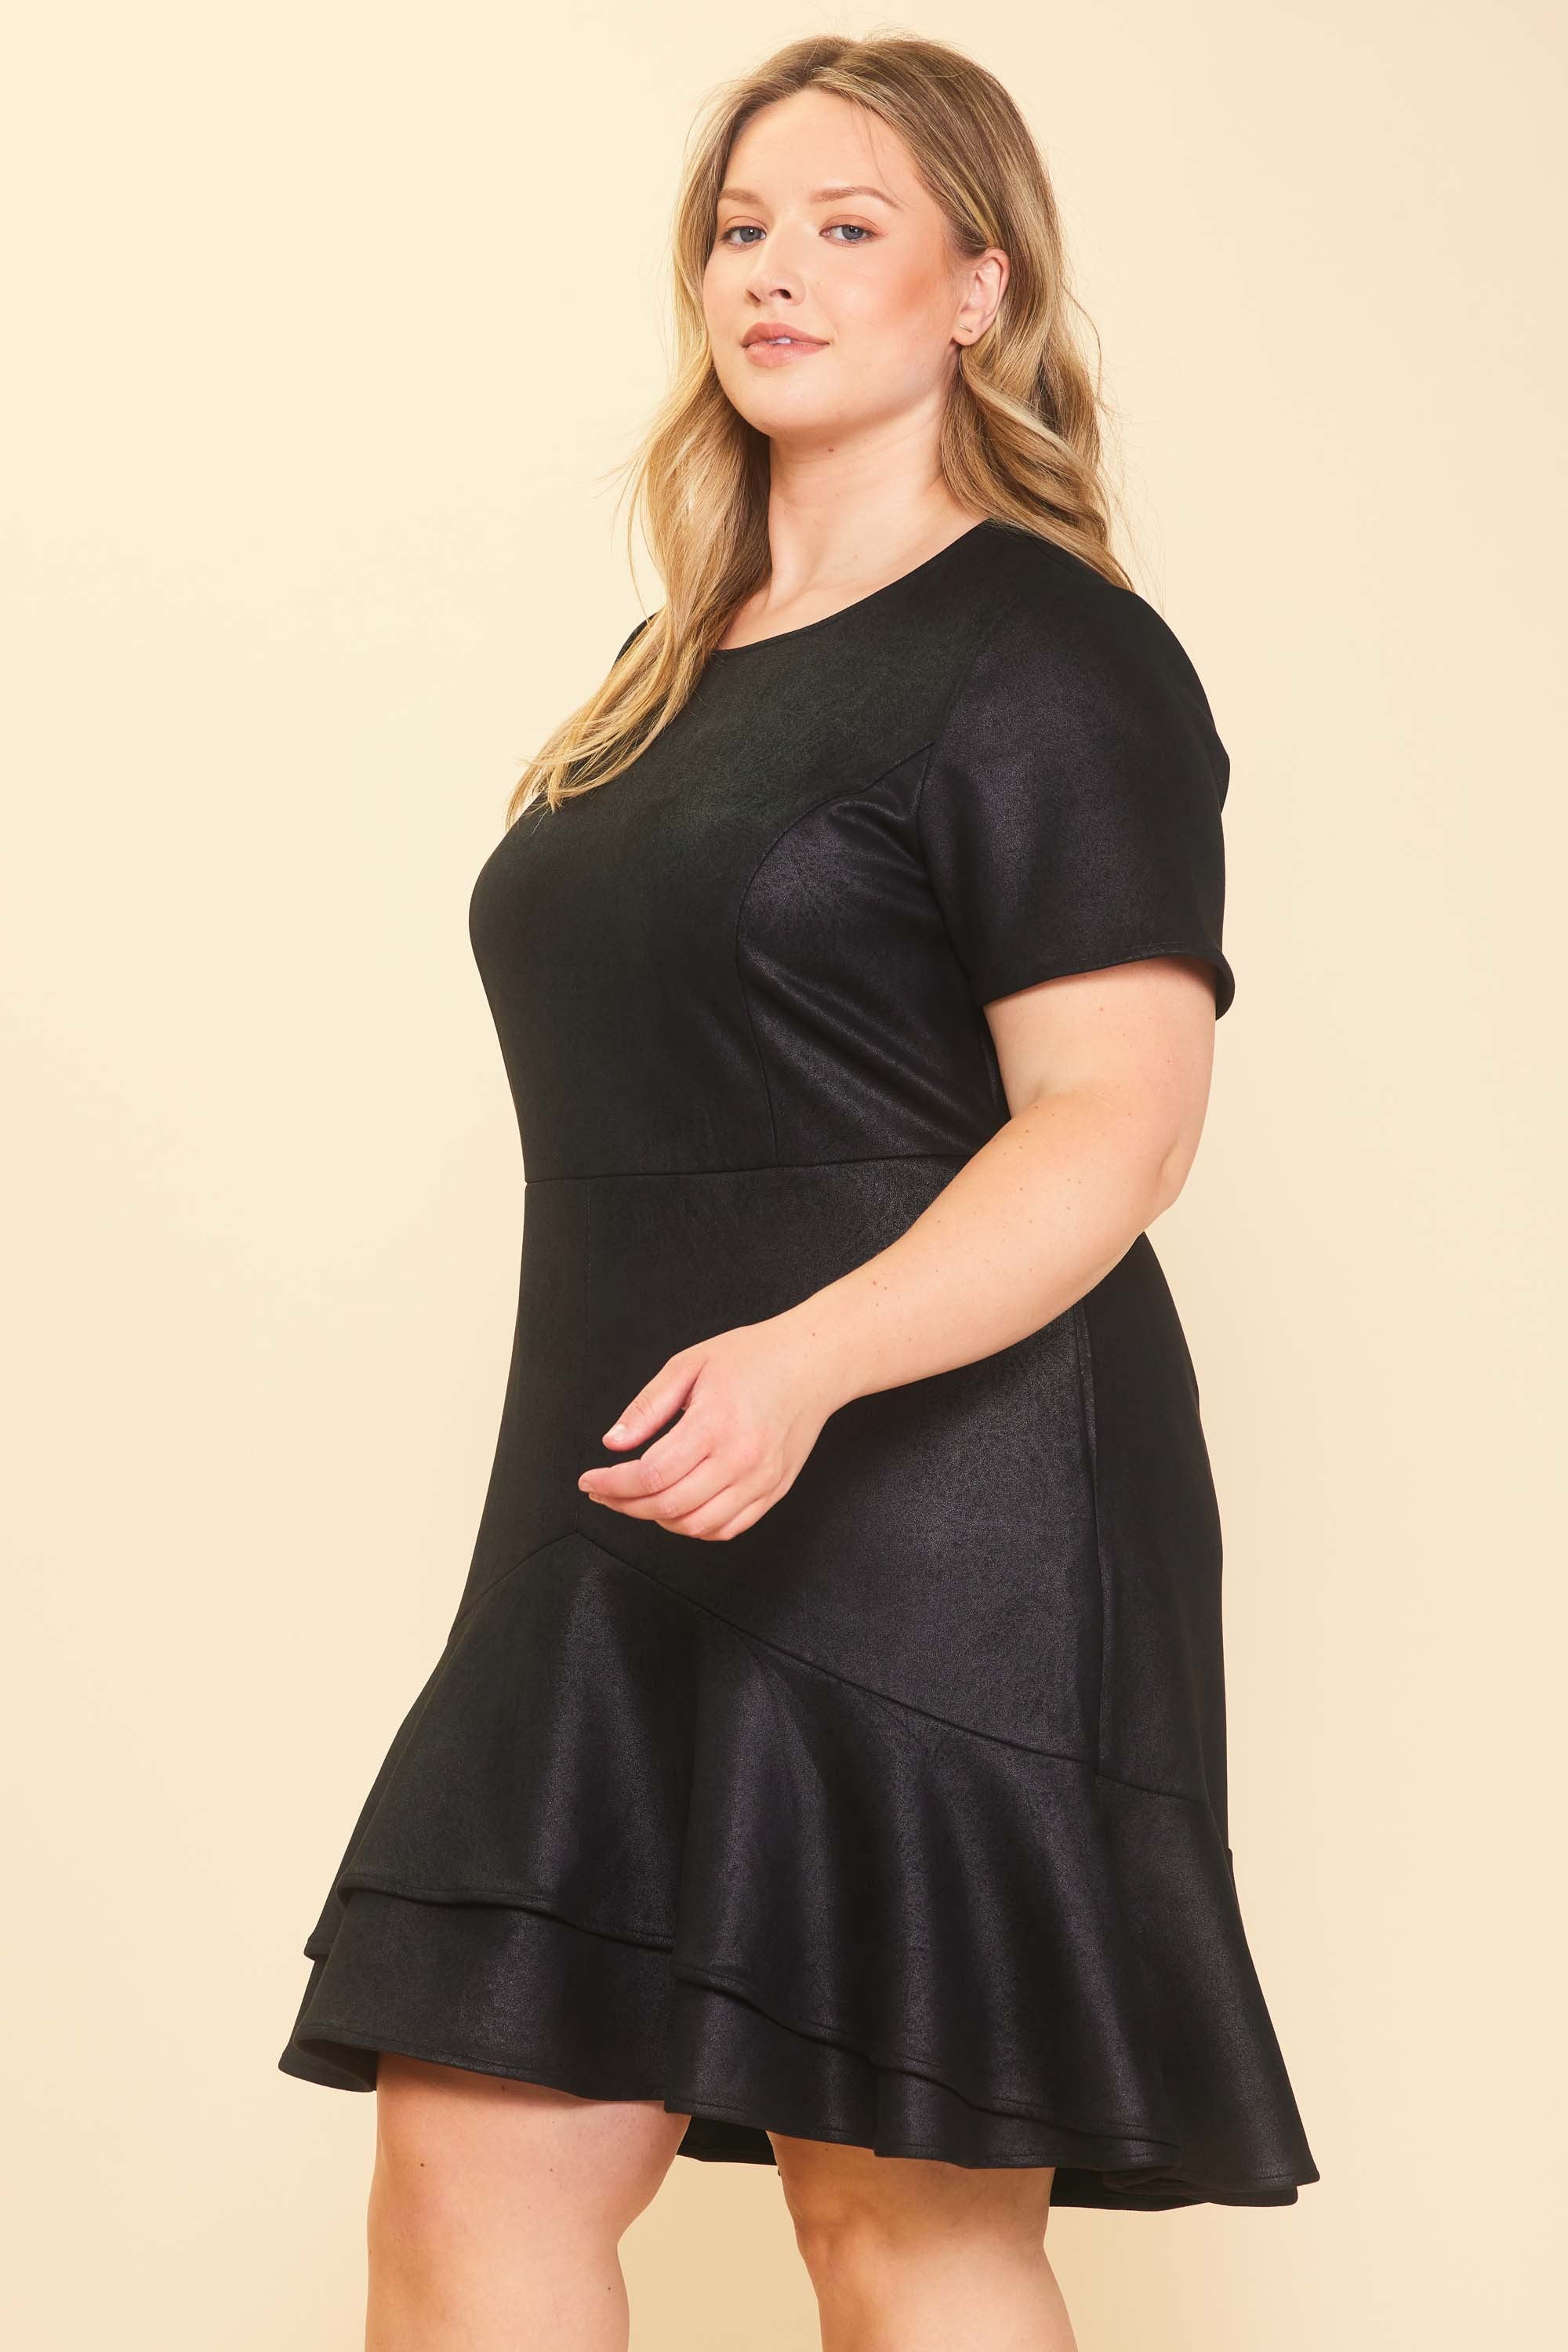 Skies Are Blue Sadie Faux Suede Dress - Black, short sleeve, round neck, tiered ruffle skirt, curvy